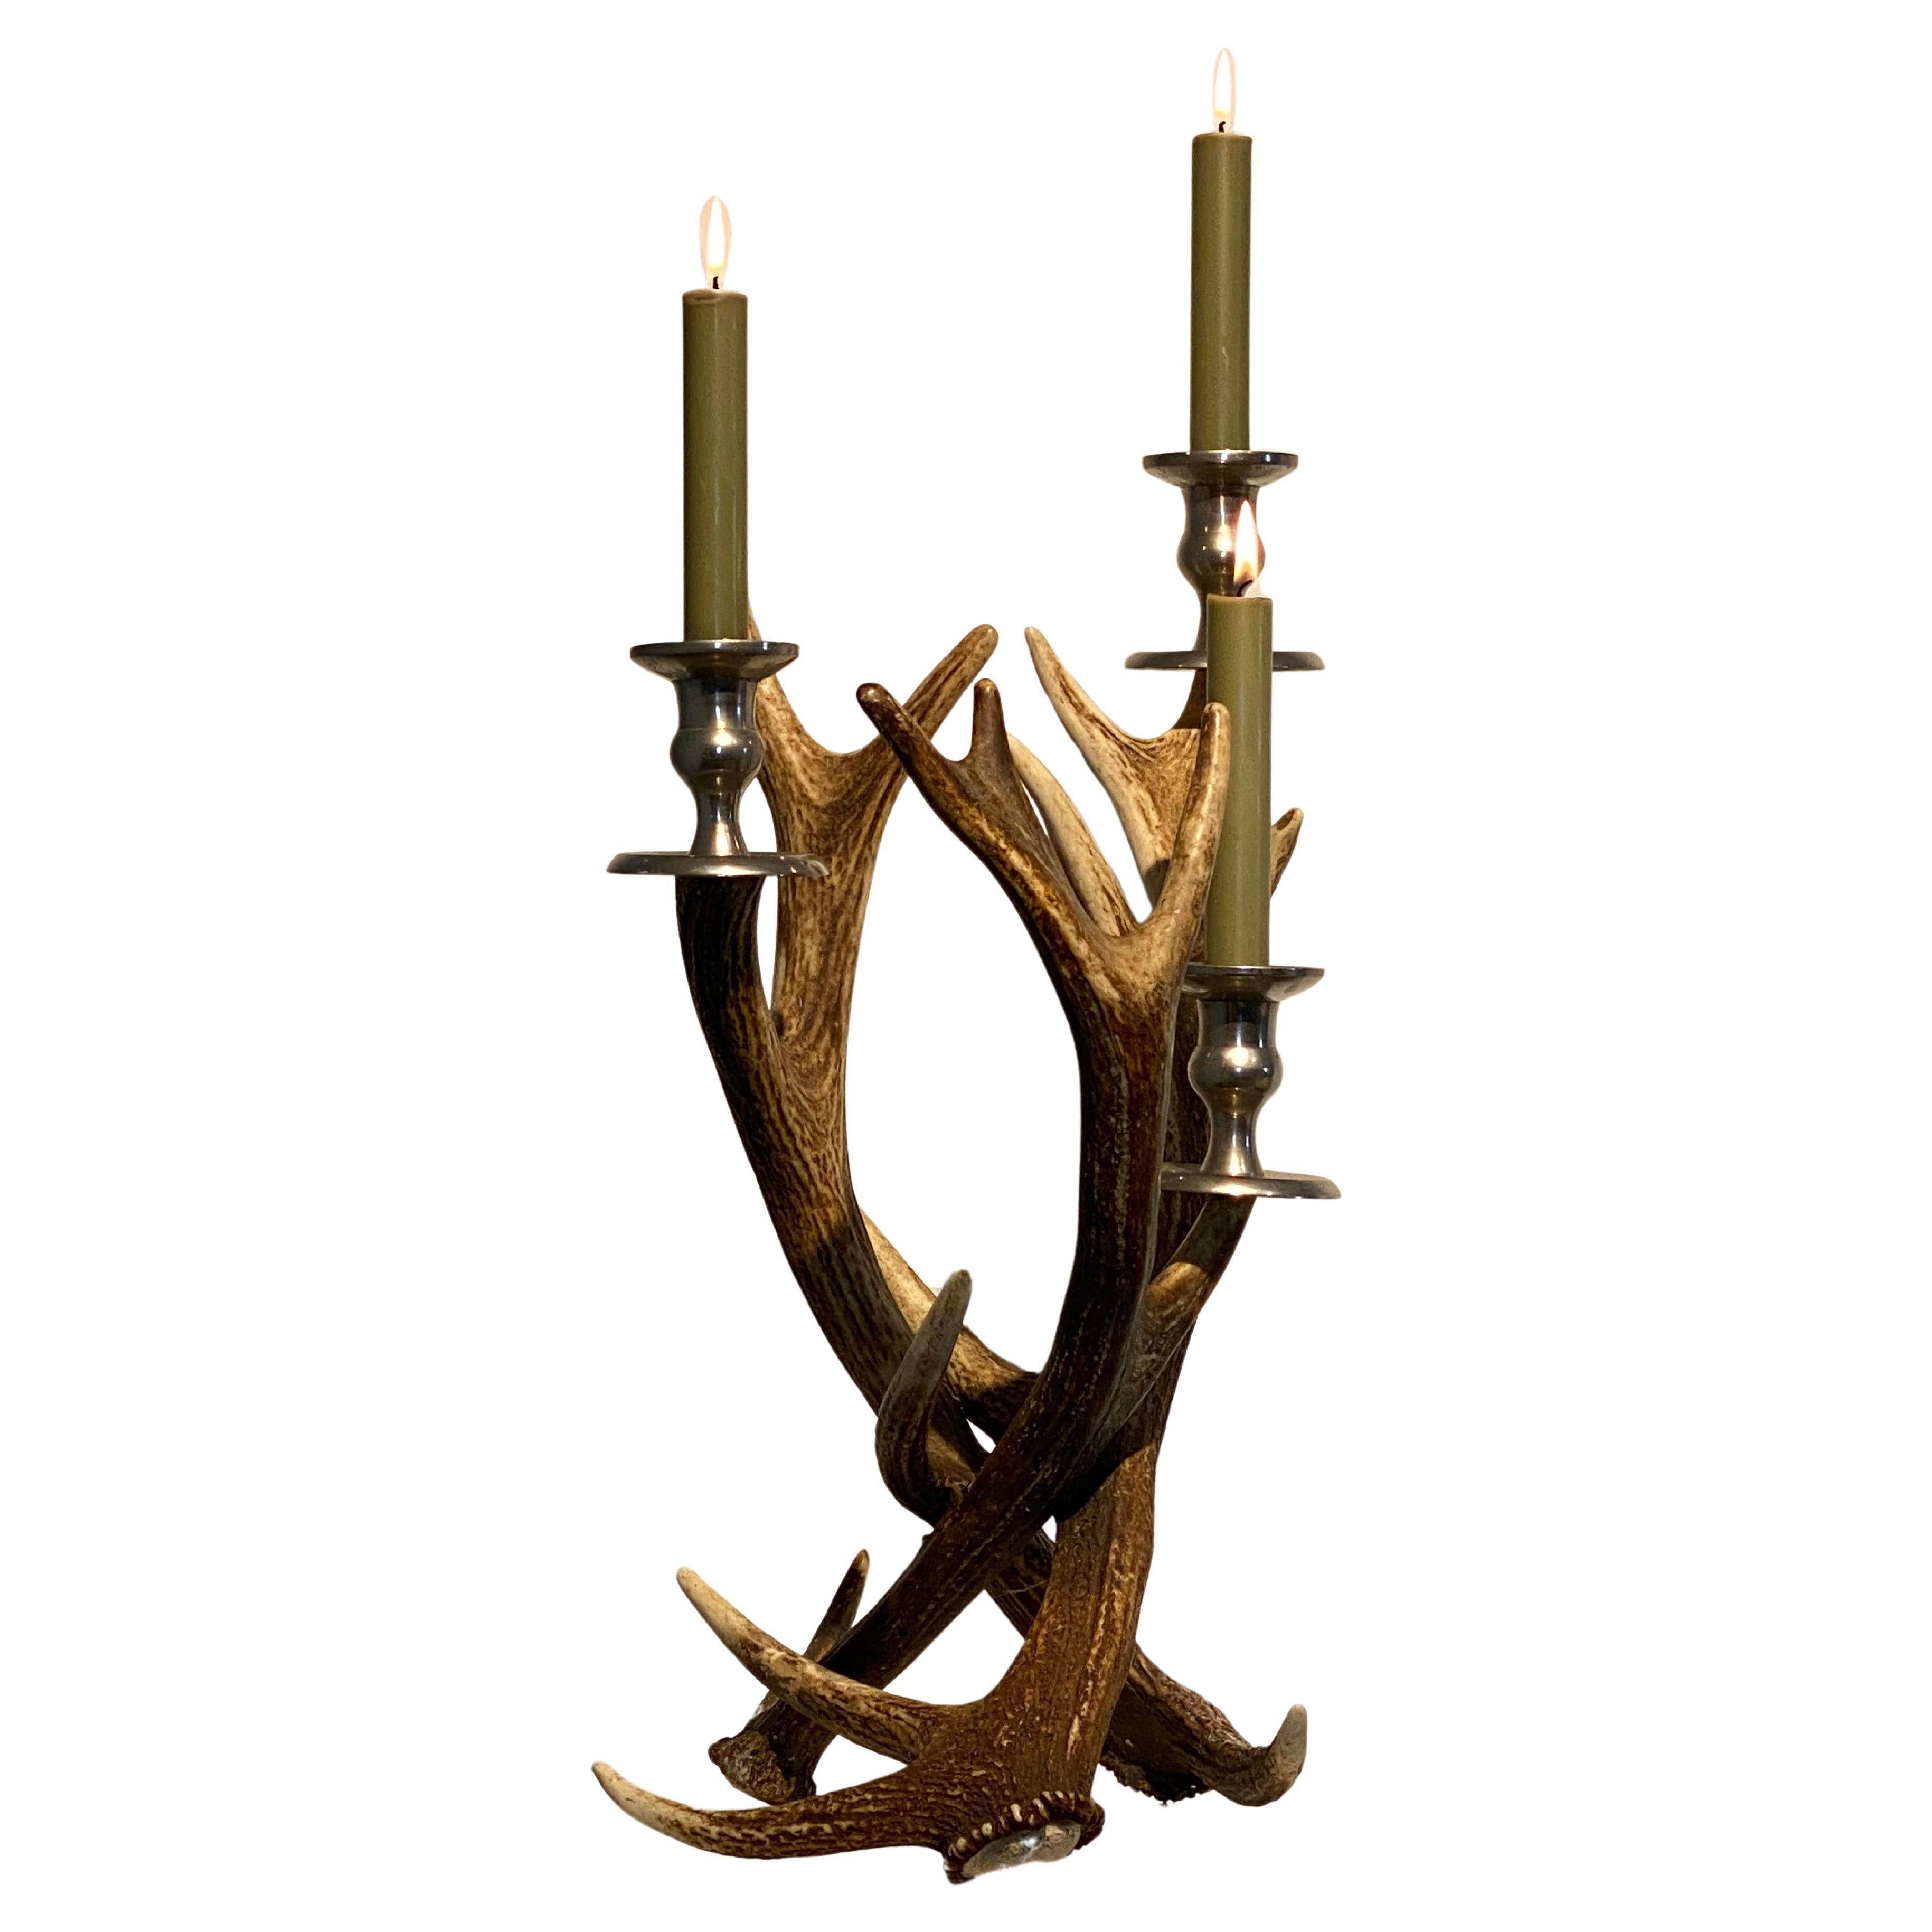 Rustic Taxidermy Deer Horn Candle For Sale